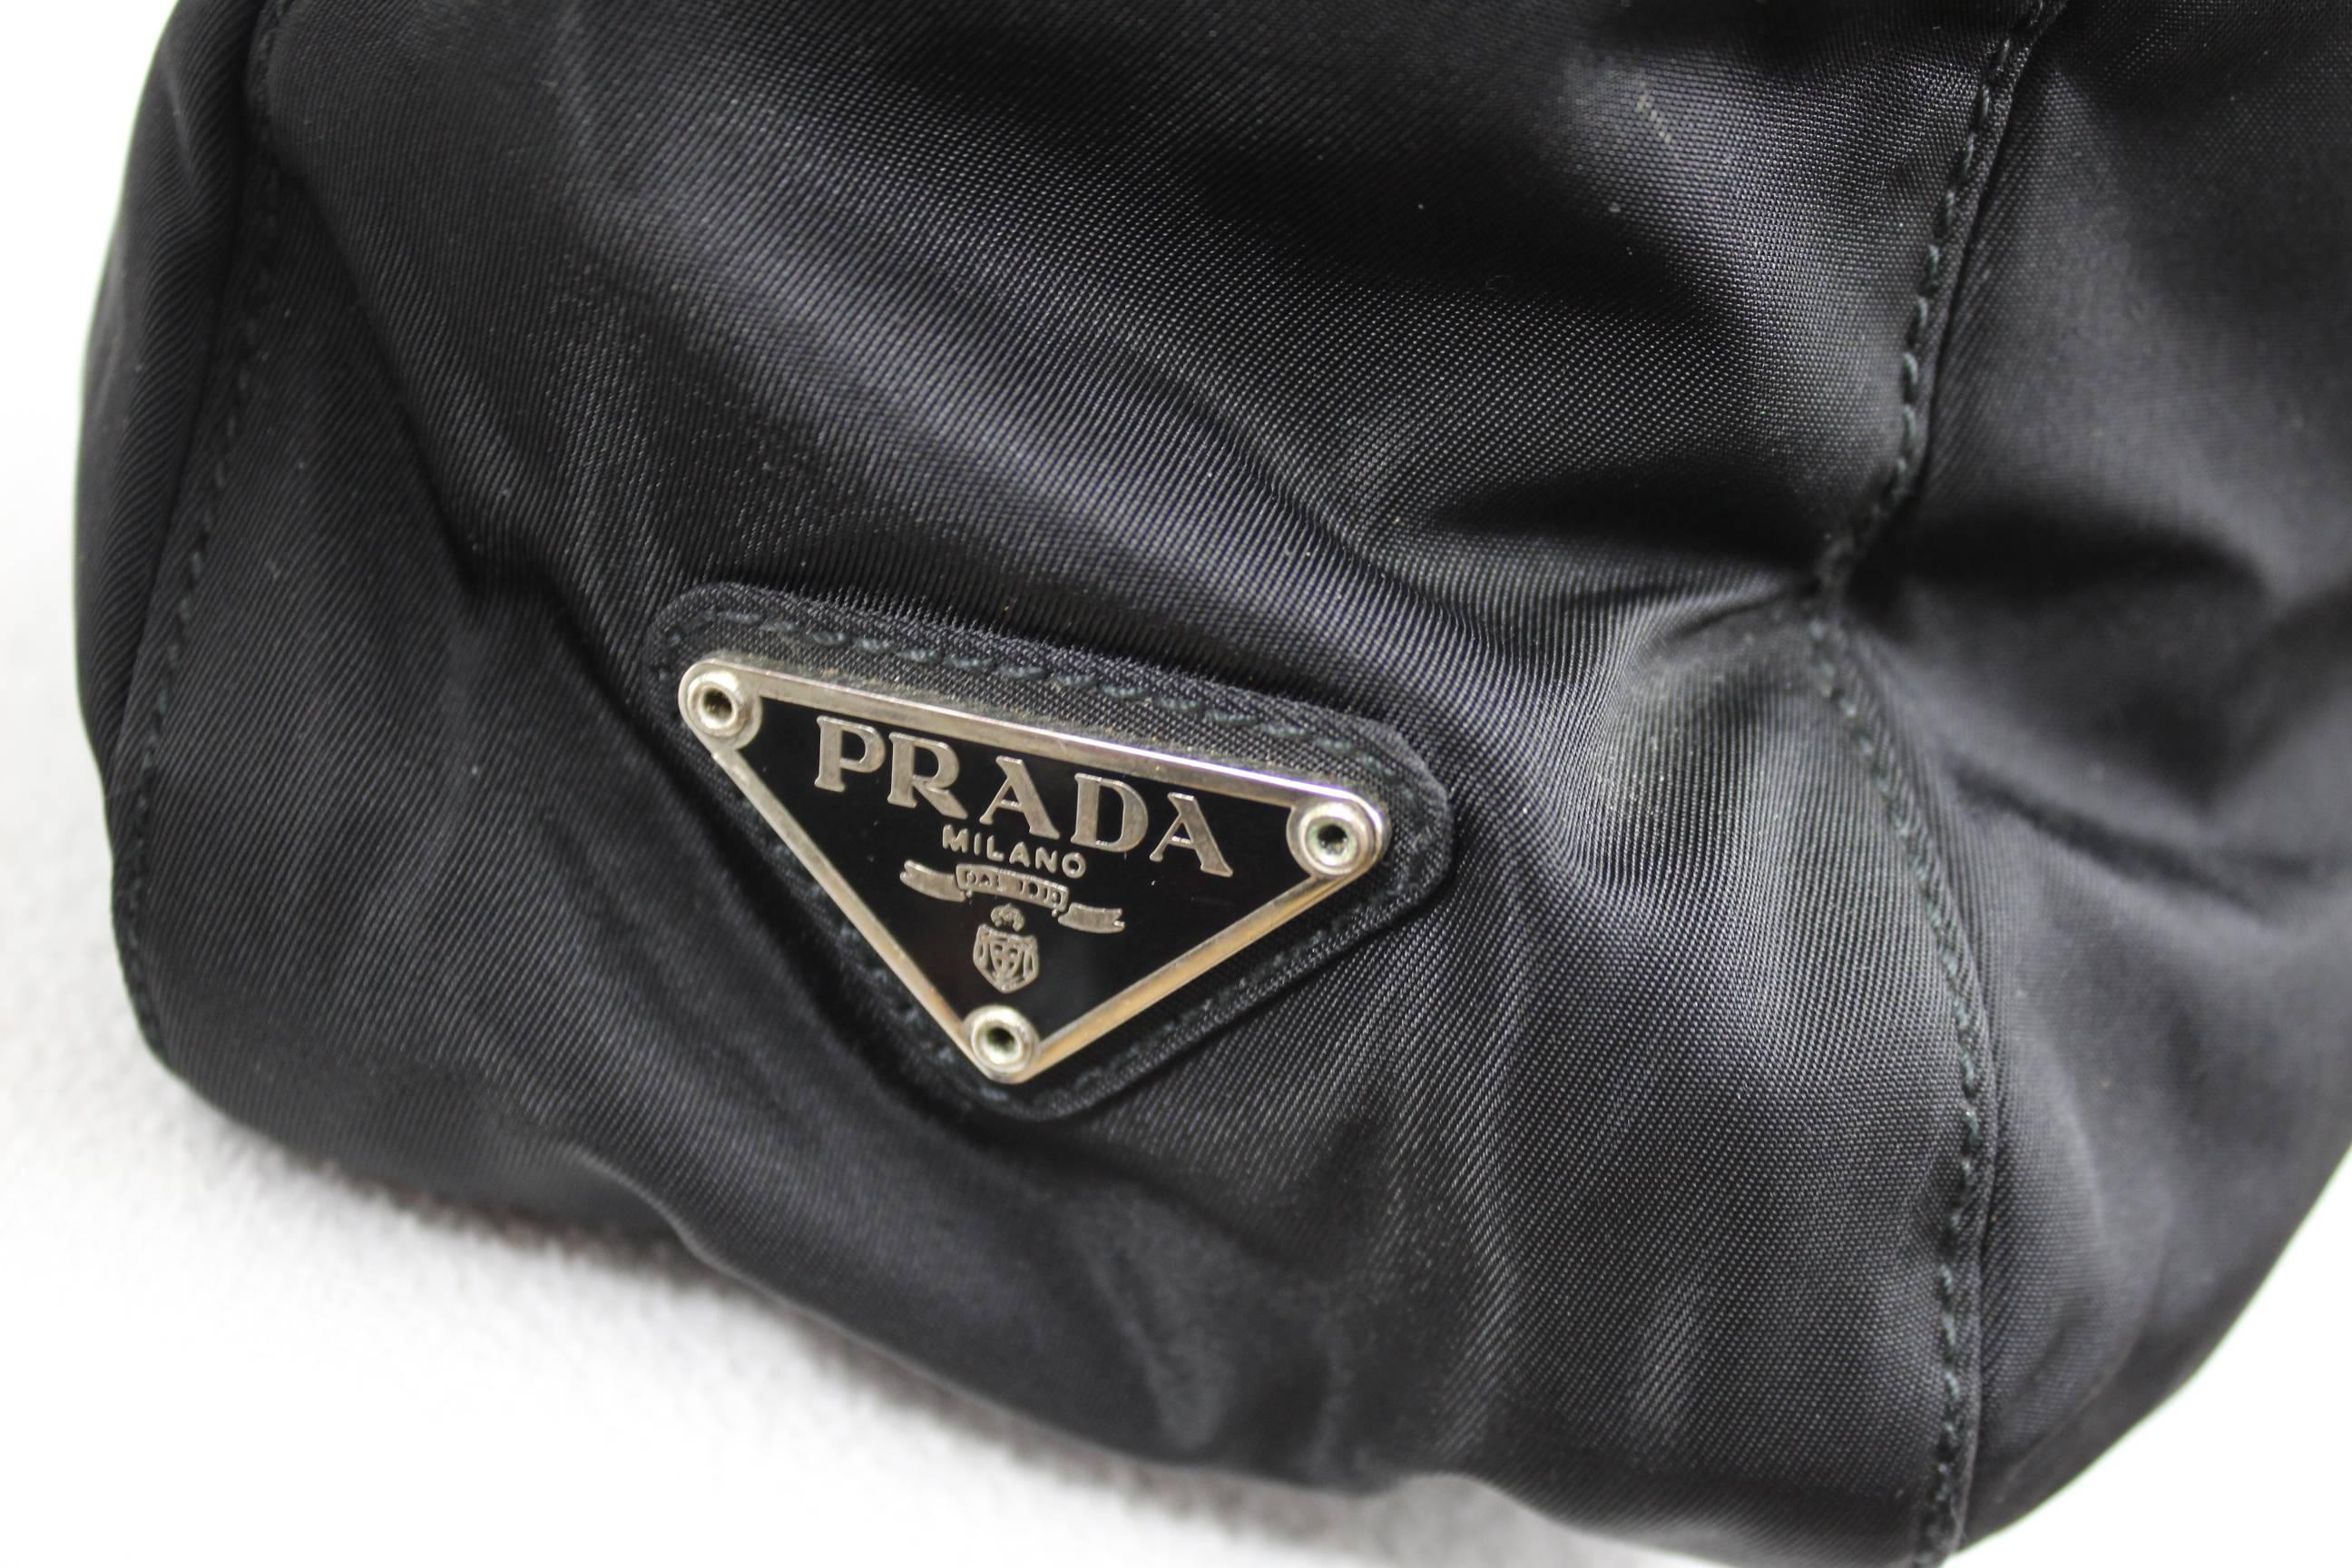 Really nice vintage Prada bag with plexi handle.

This bag was an icon of the brand.

Good condition, however is presents some signs light of use.

Size 33x31
